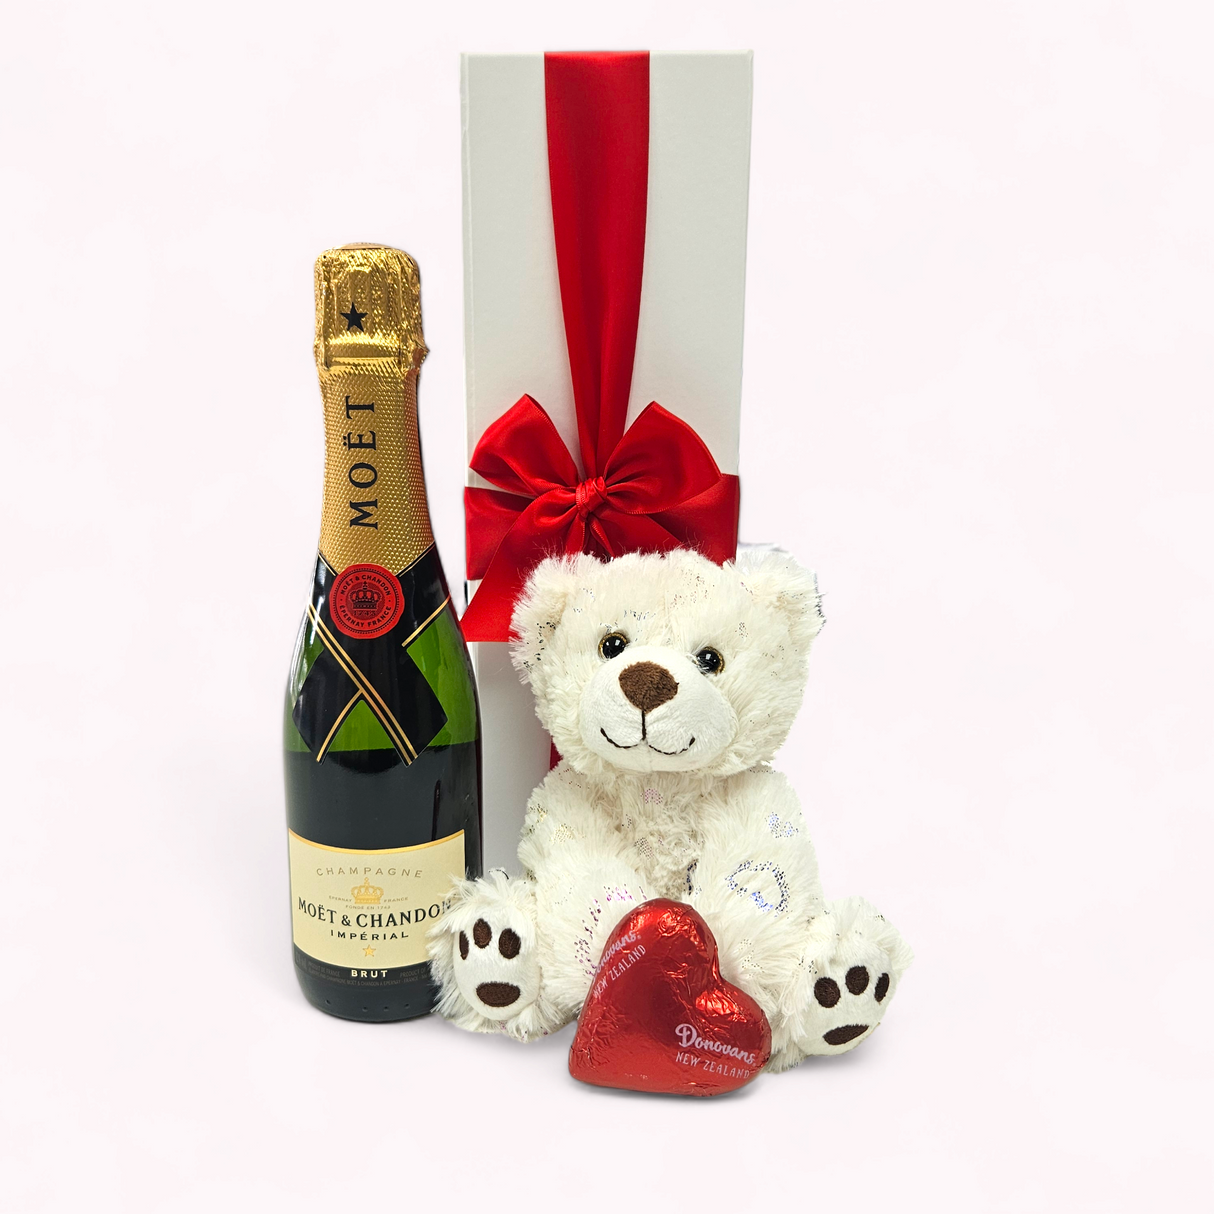 Spoil Me With Moet - Gift Box